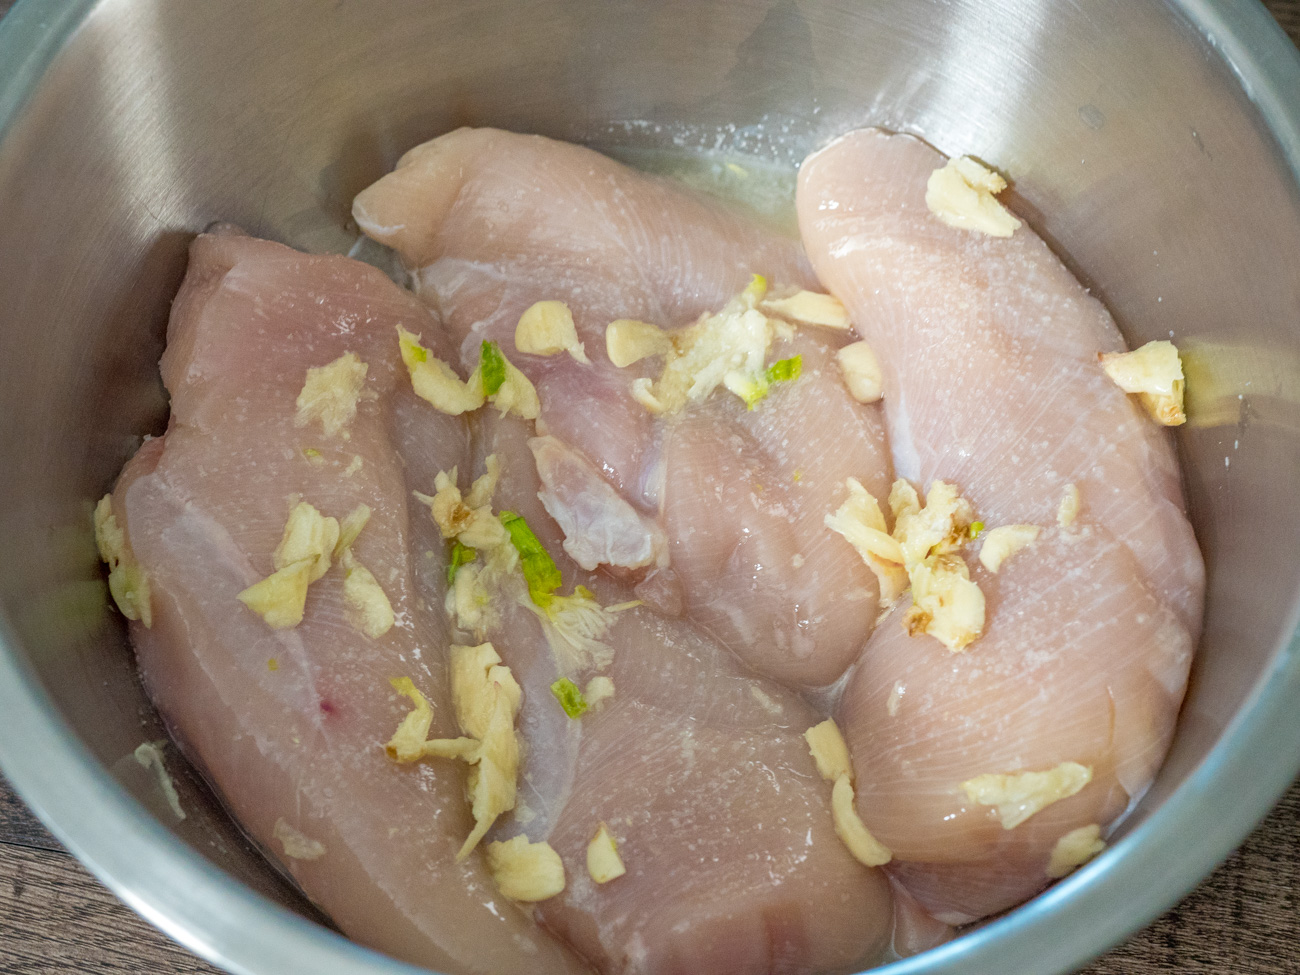 Combine garlic and lemon for the marinade. Pour over chicken to coat and sprinkle with salt. Marinate the chicken for 1-2 hours or overnight in the refrigerator.